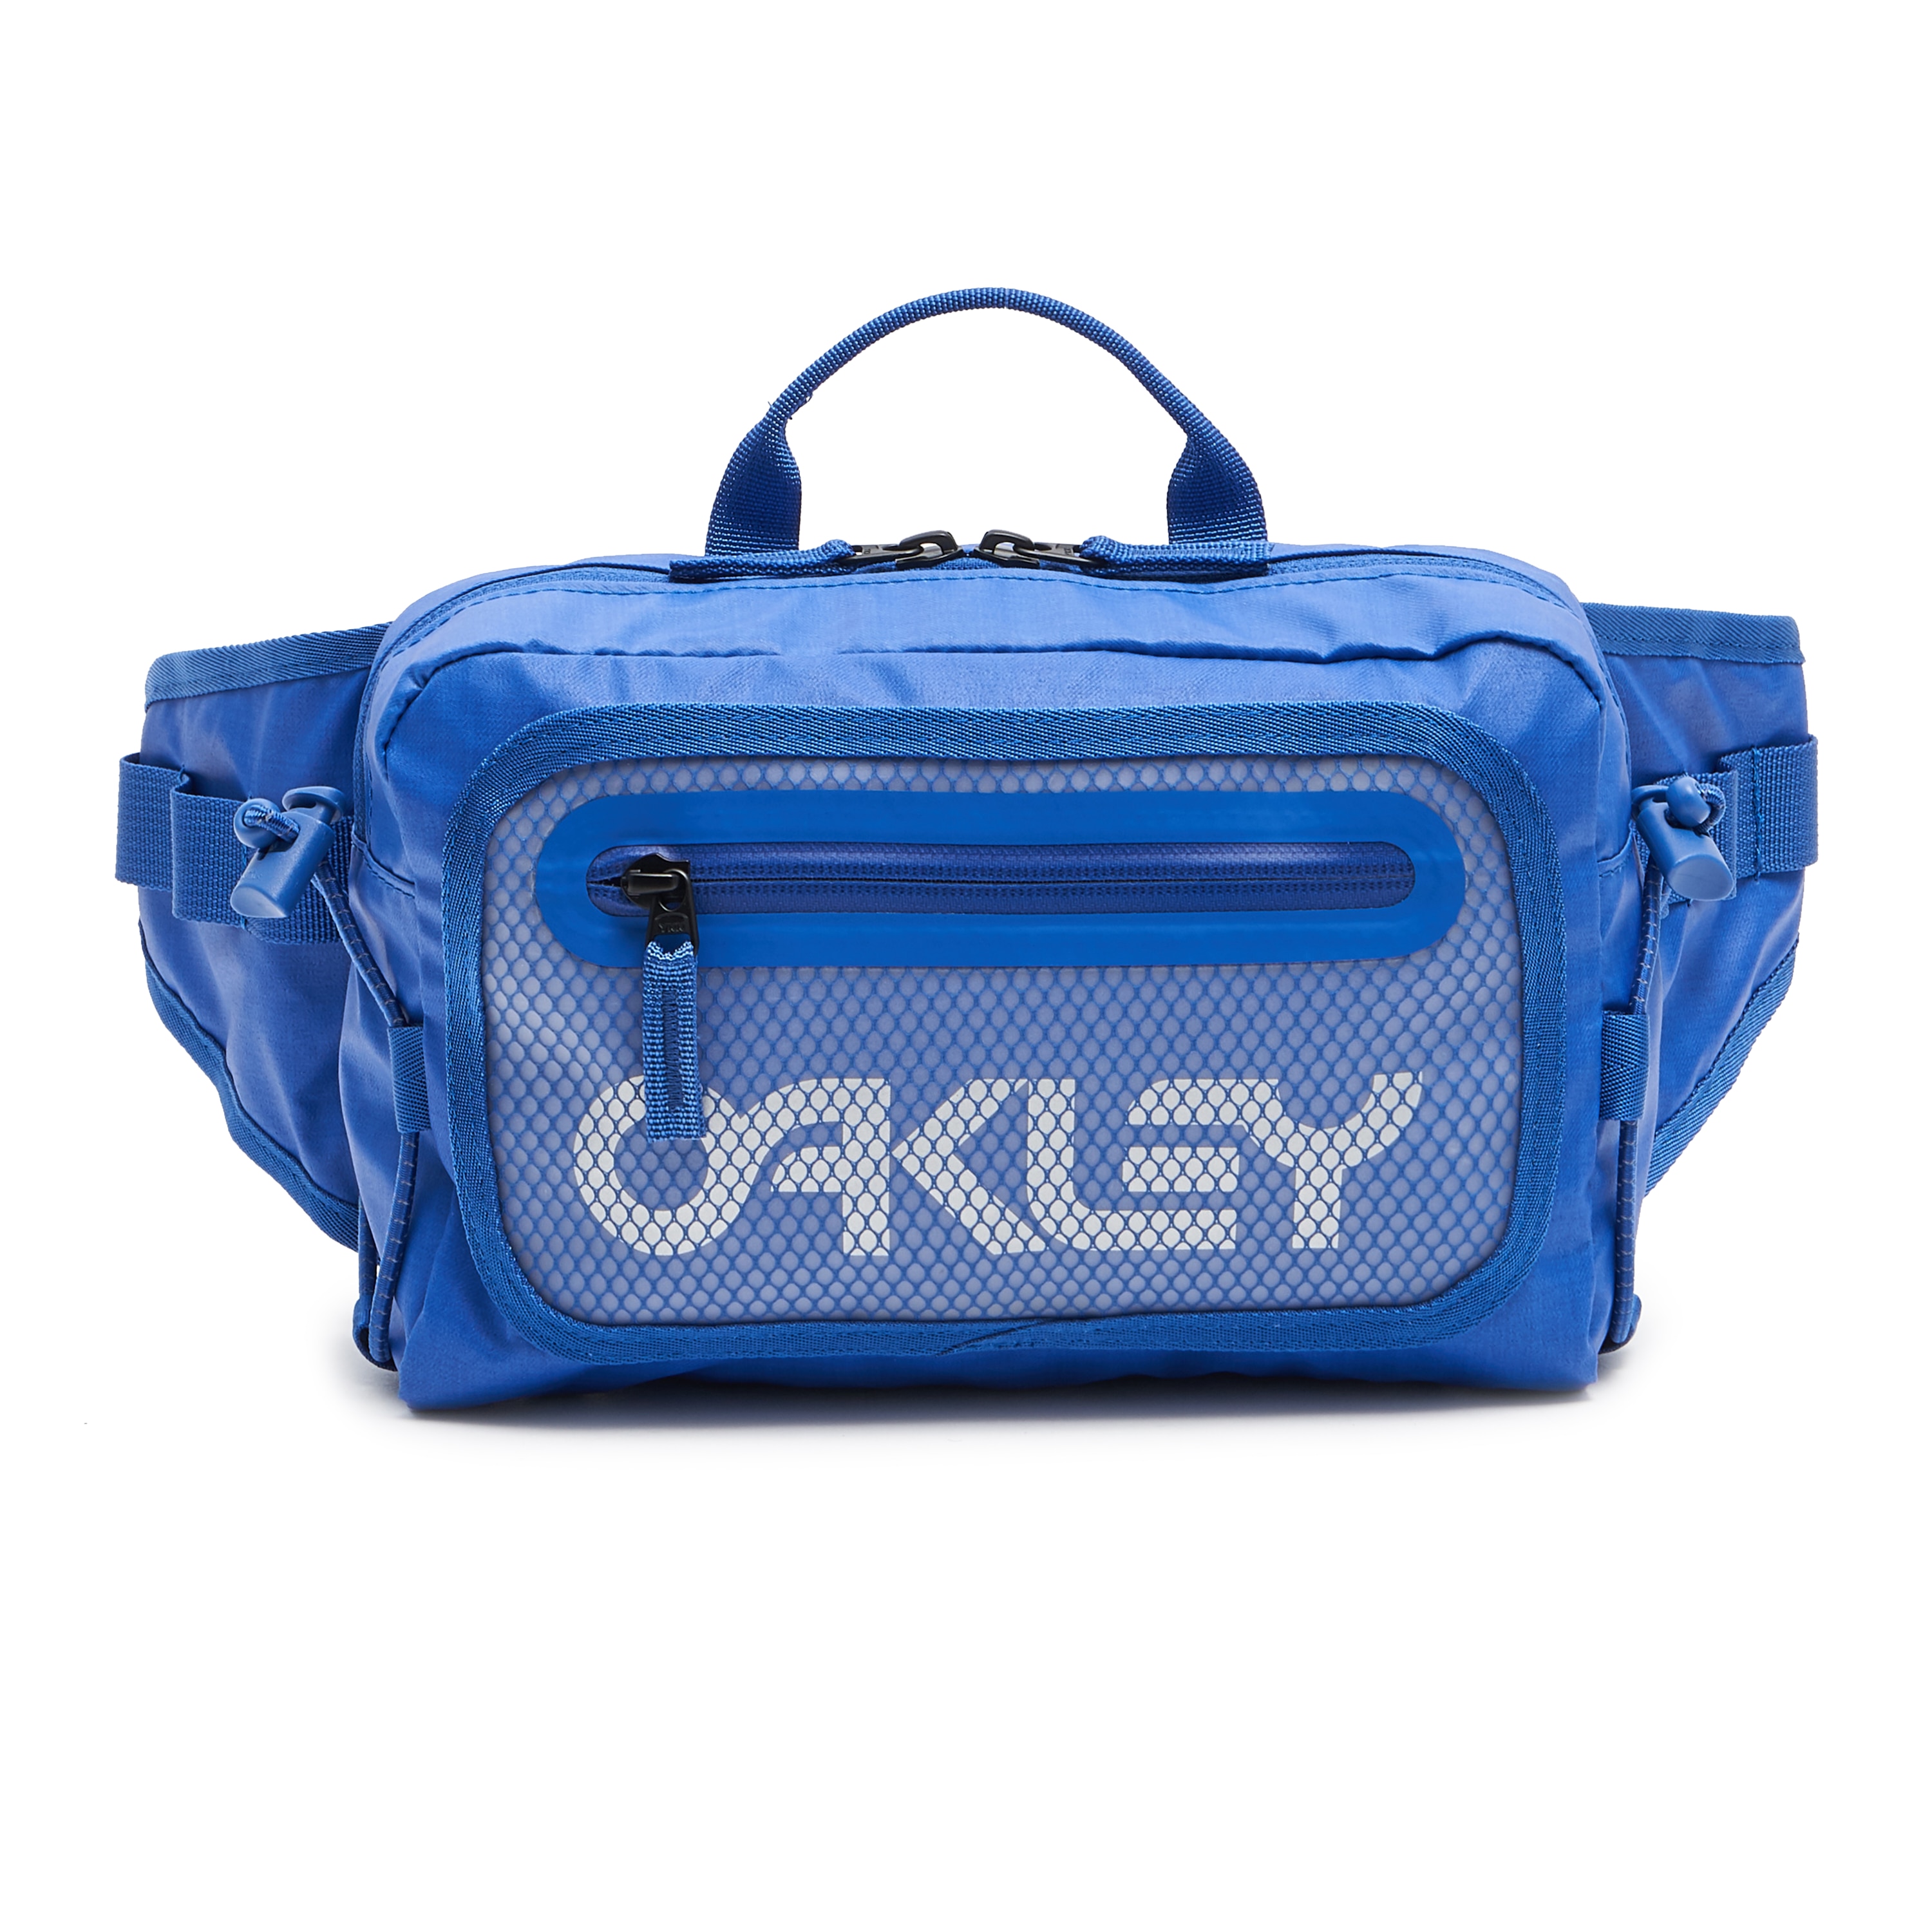 Fade out regiment Asia Oakley 90'S Beltbag - Electric Shade | Oakley JP Store